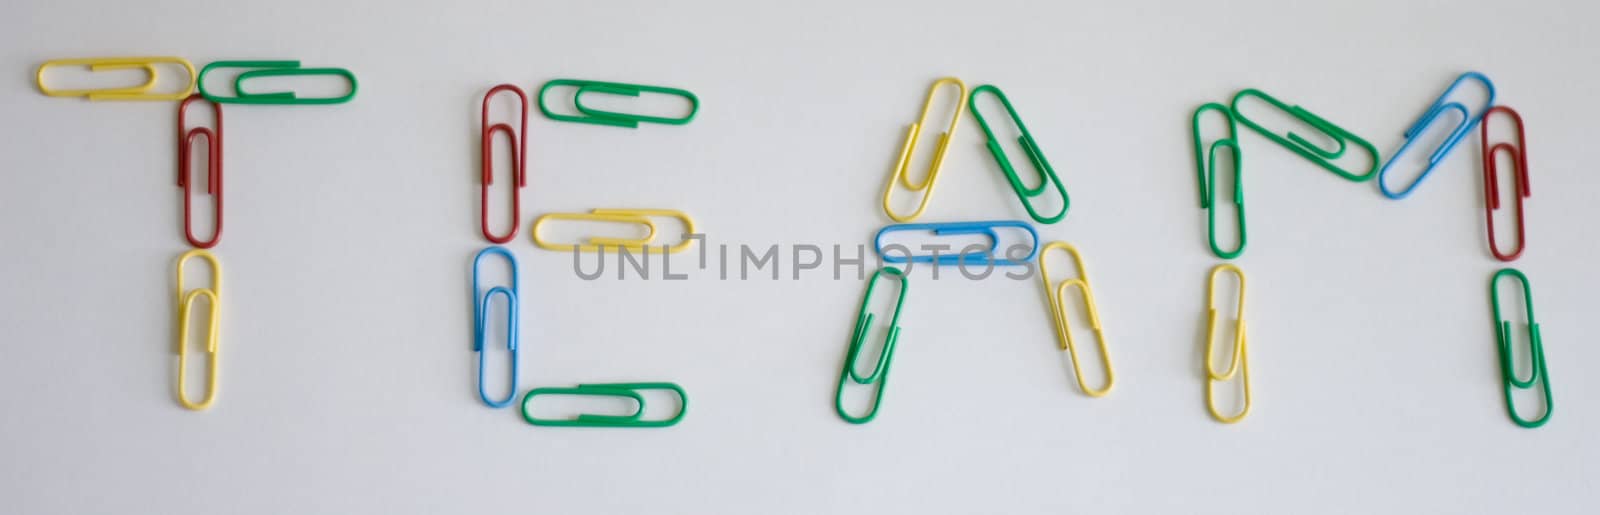 multi-color paper-clips on grey background